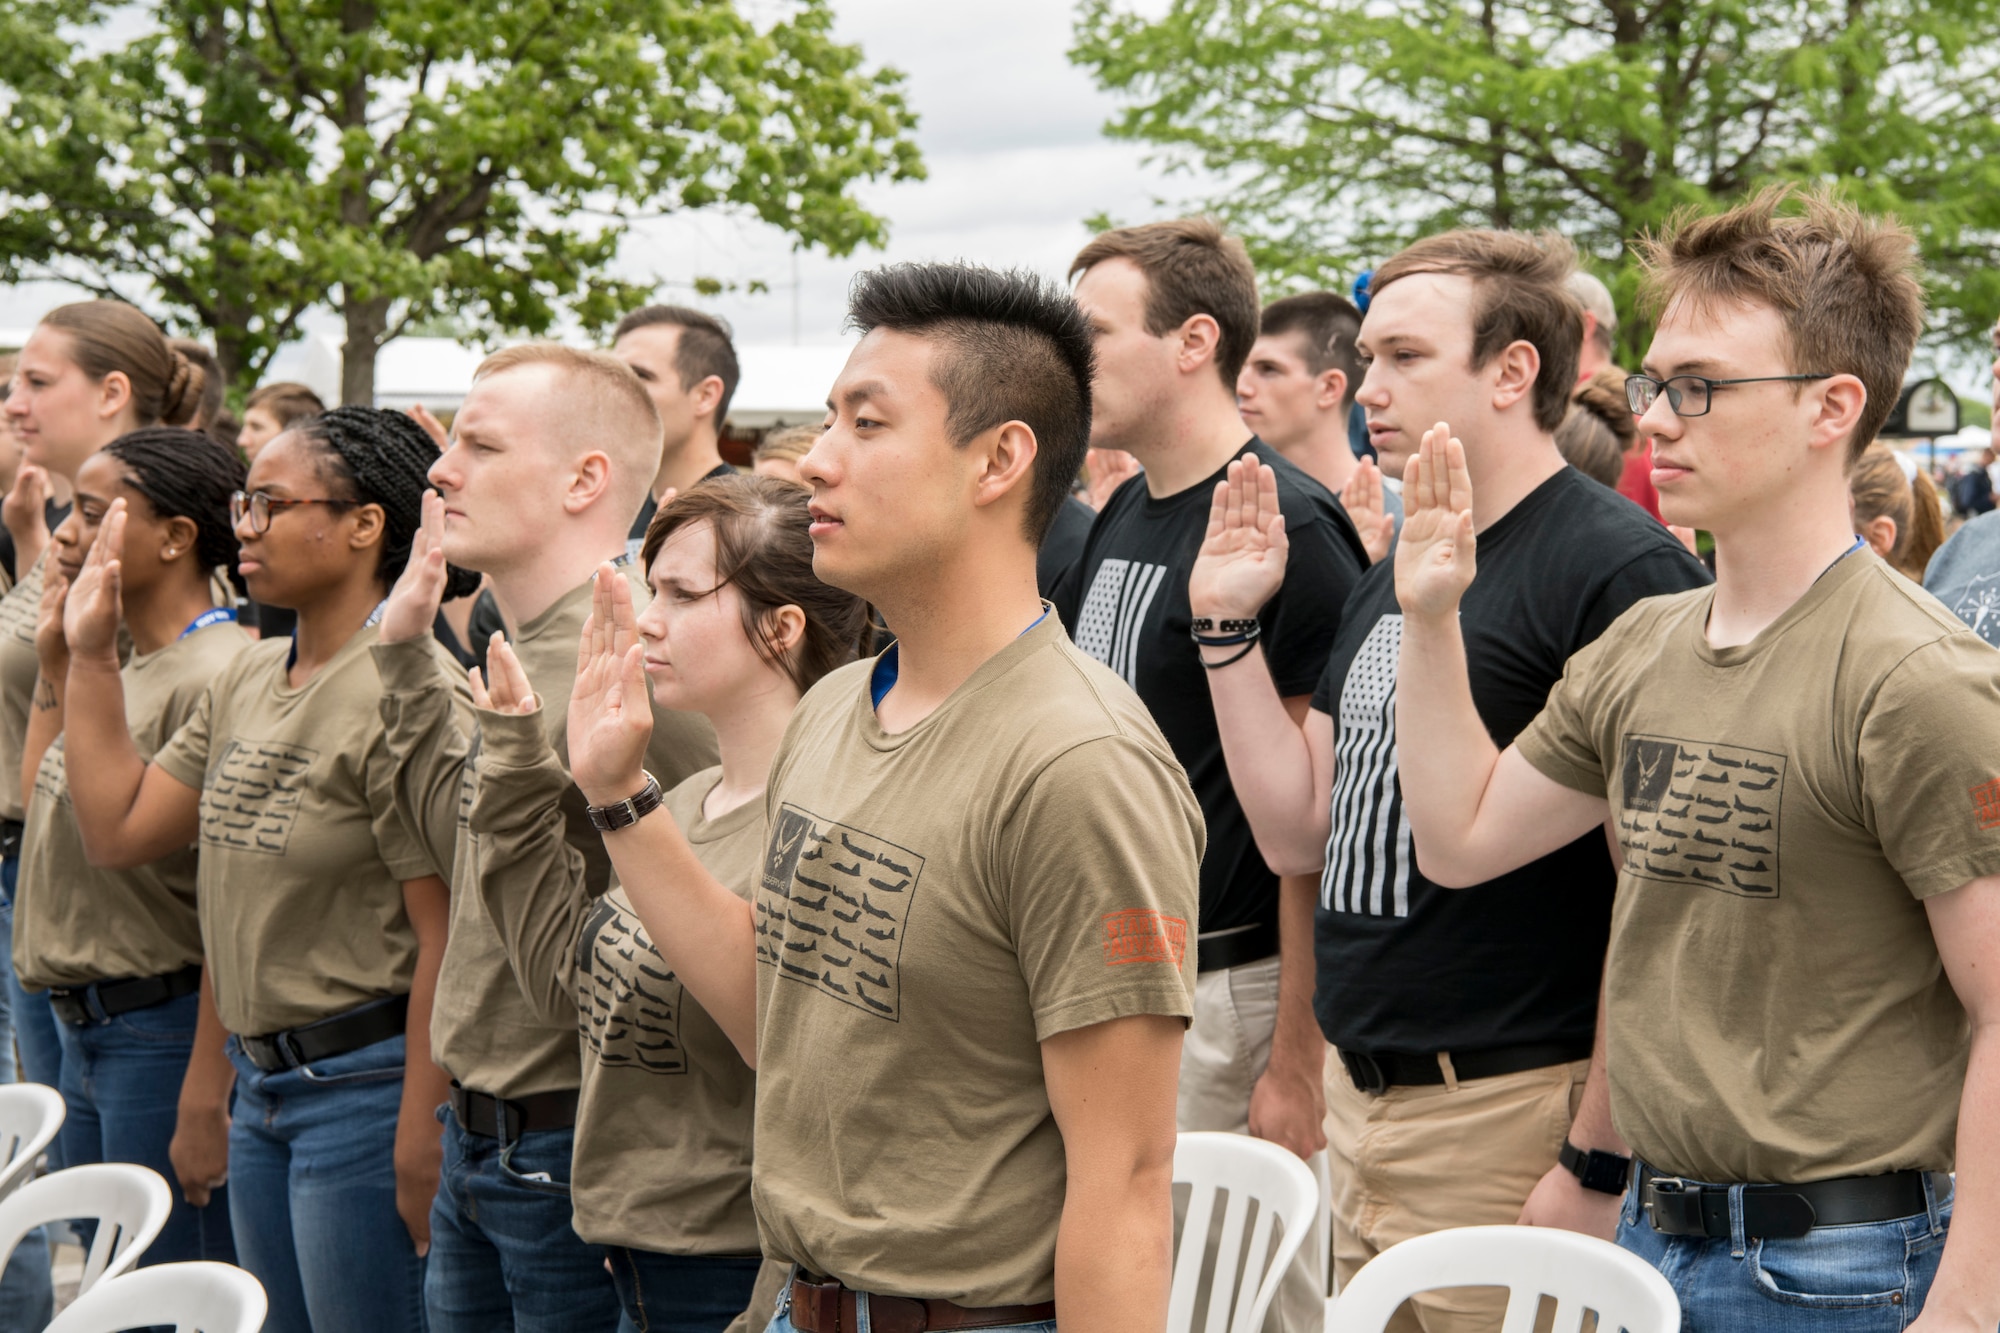 Recruits from the 434th Air Refueling Wing at Grissom Air Reserve Base, Indiana recite the oath of enlistment during a mass enlistment ceremony at the Indianapolis Motor Speedway May 19, 2019. The oath of enlistment is a military oath made by members of the United States armed forces who are not commissioned officers. (U.S. Air Force photo/Master Sgt. Ben Mota)